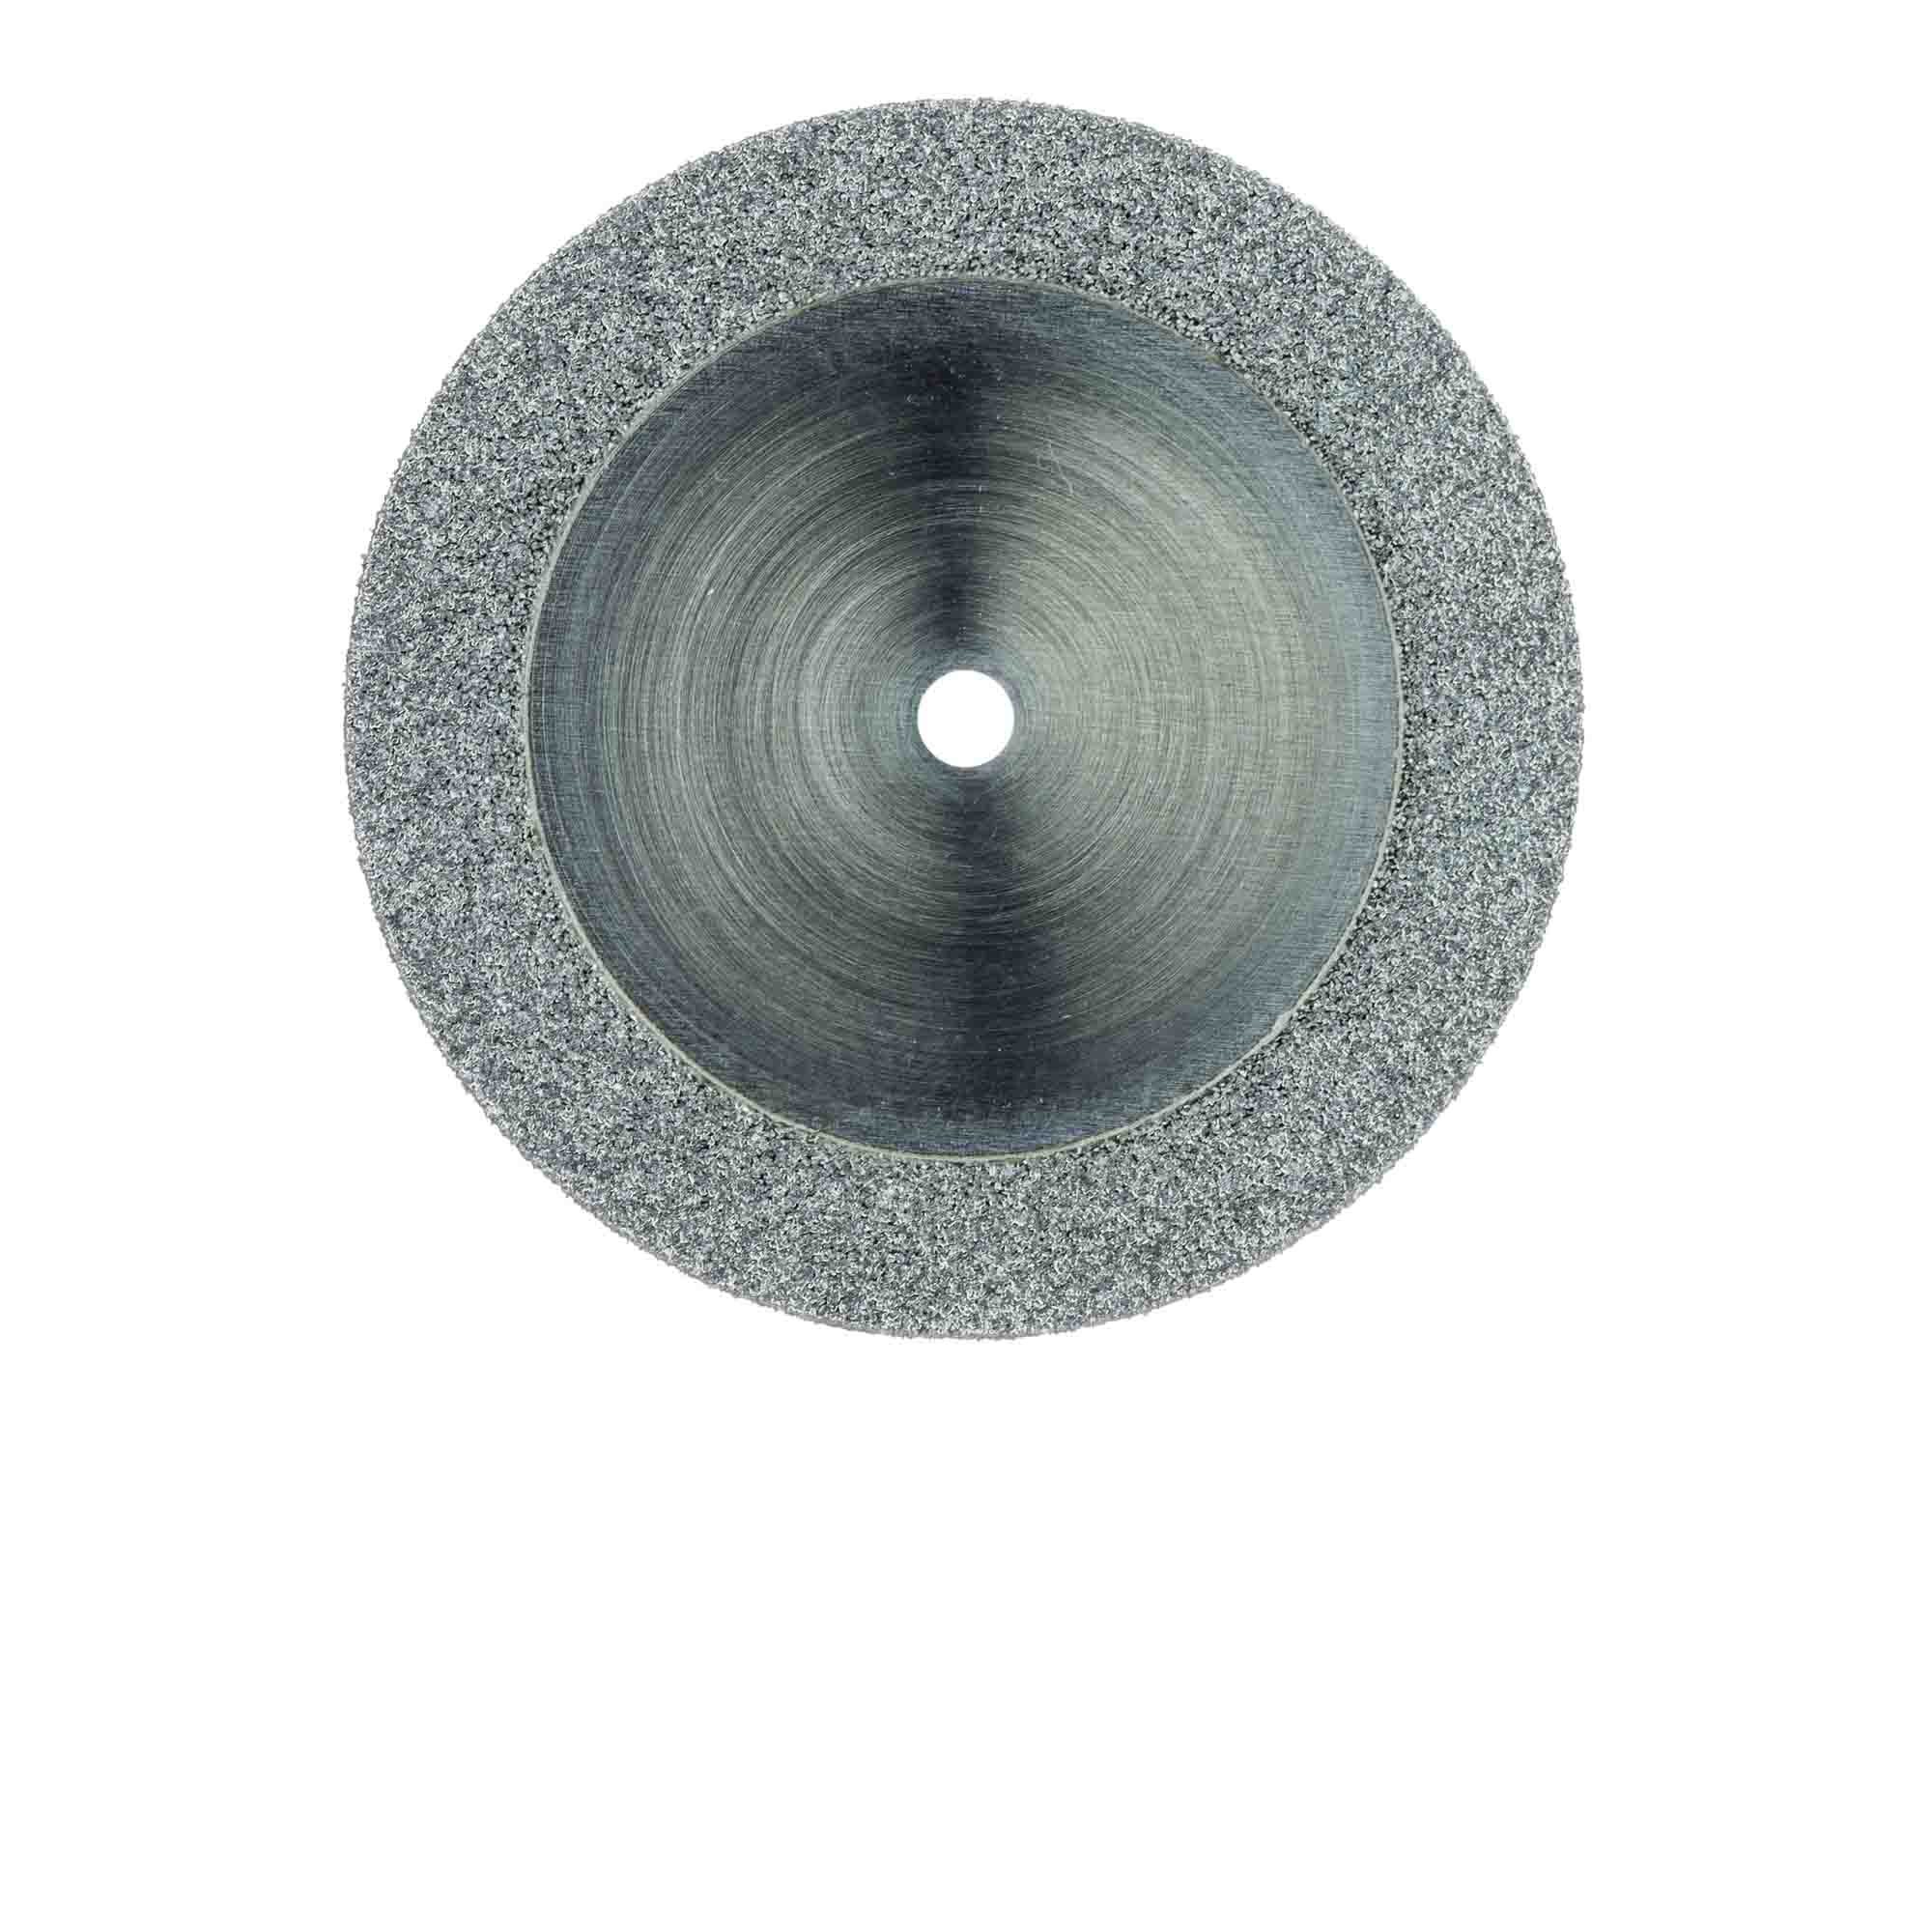 910D-220-UNM Diamond Disc, Edge, Double Sided, 0.5mm Thick, 22mm Ø, UNM